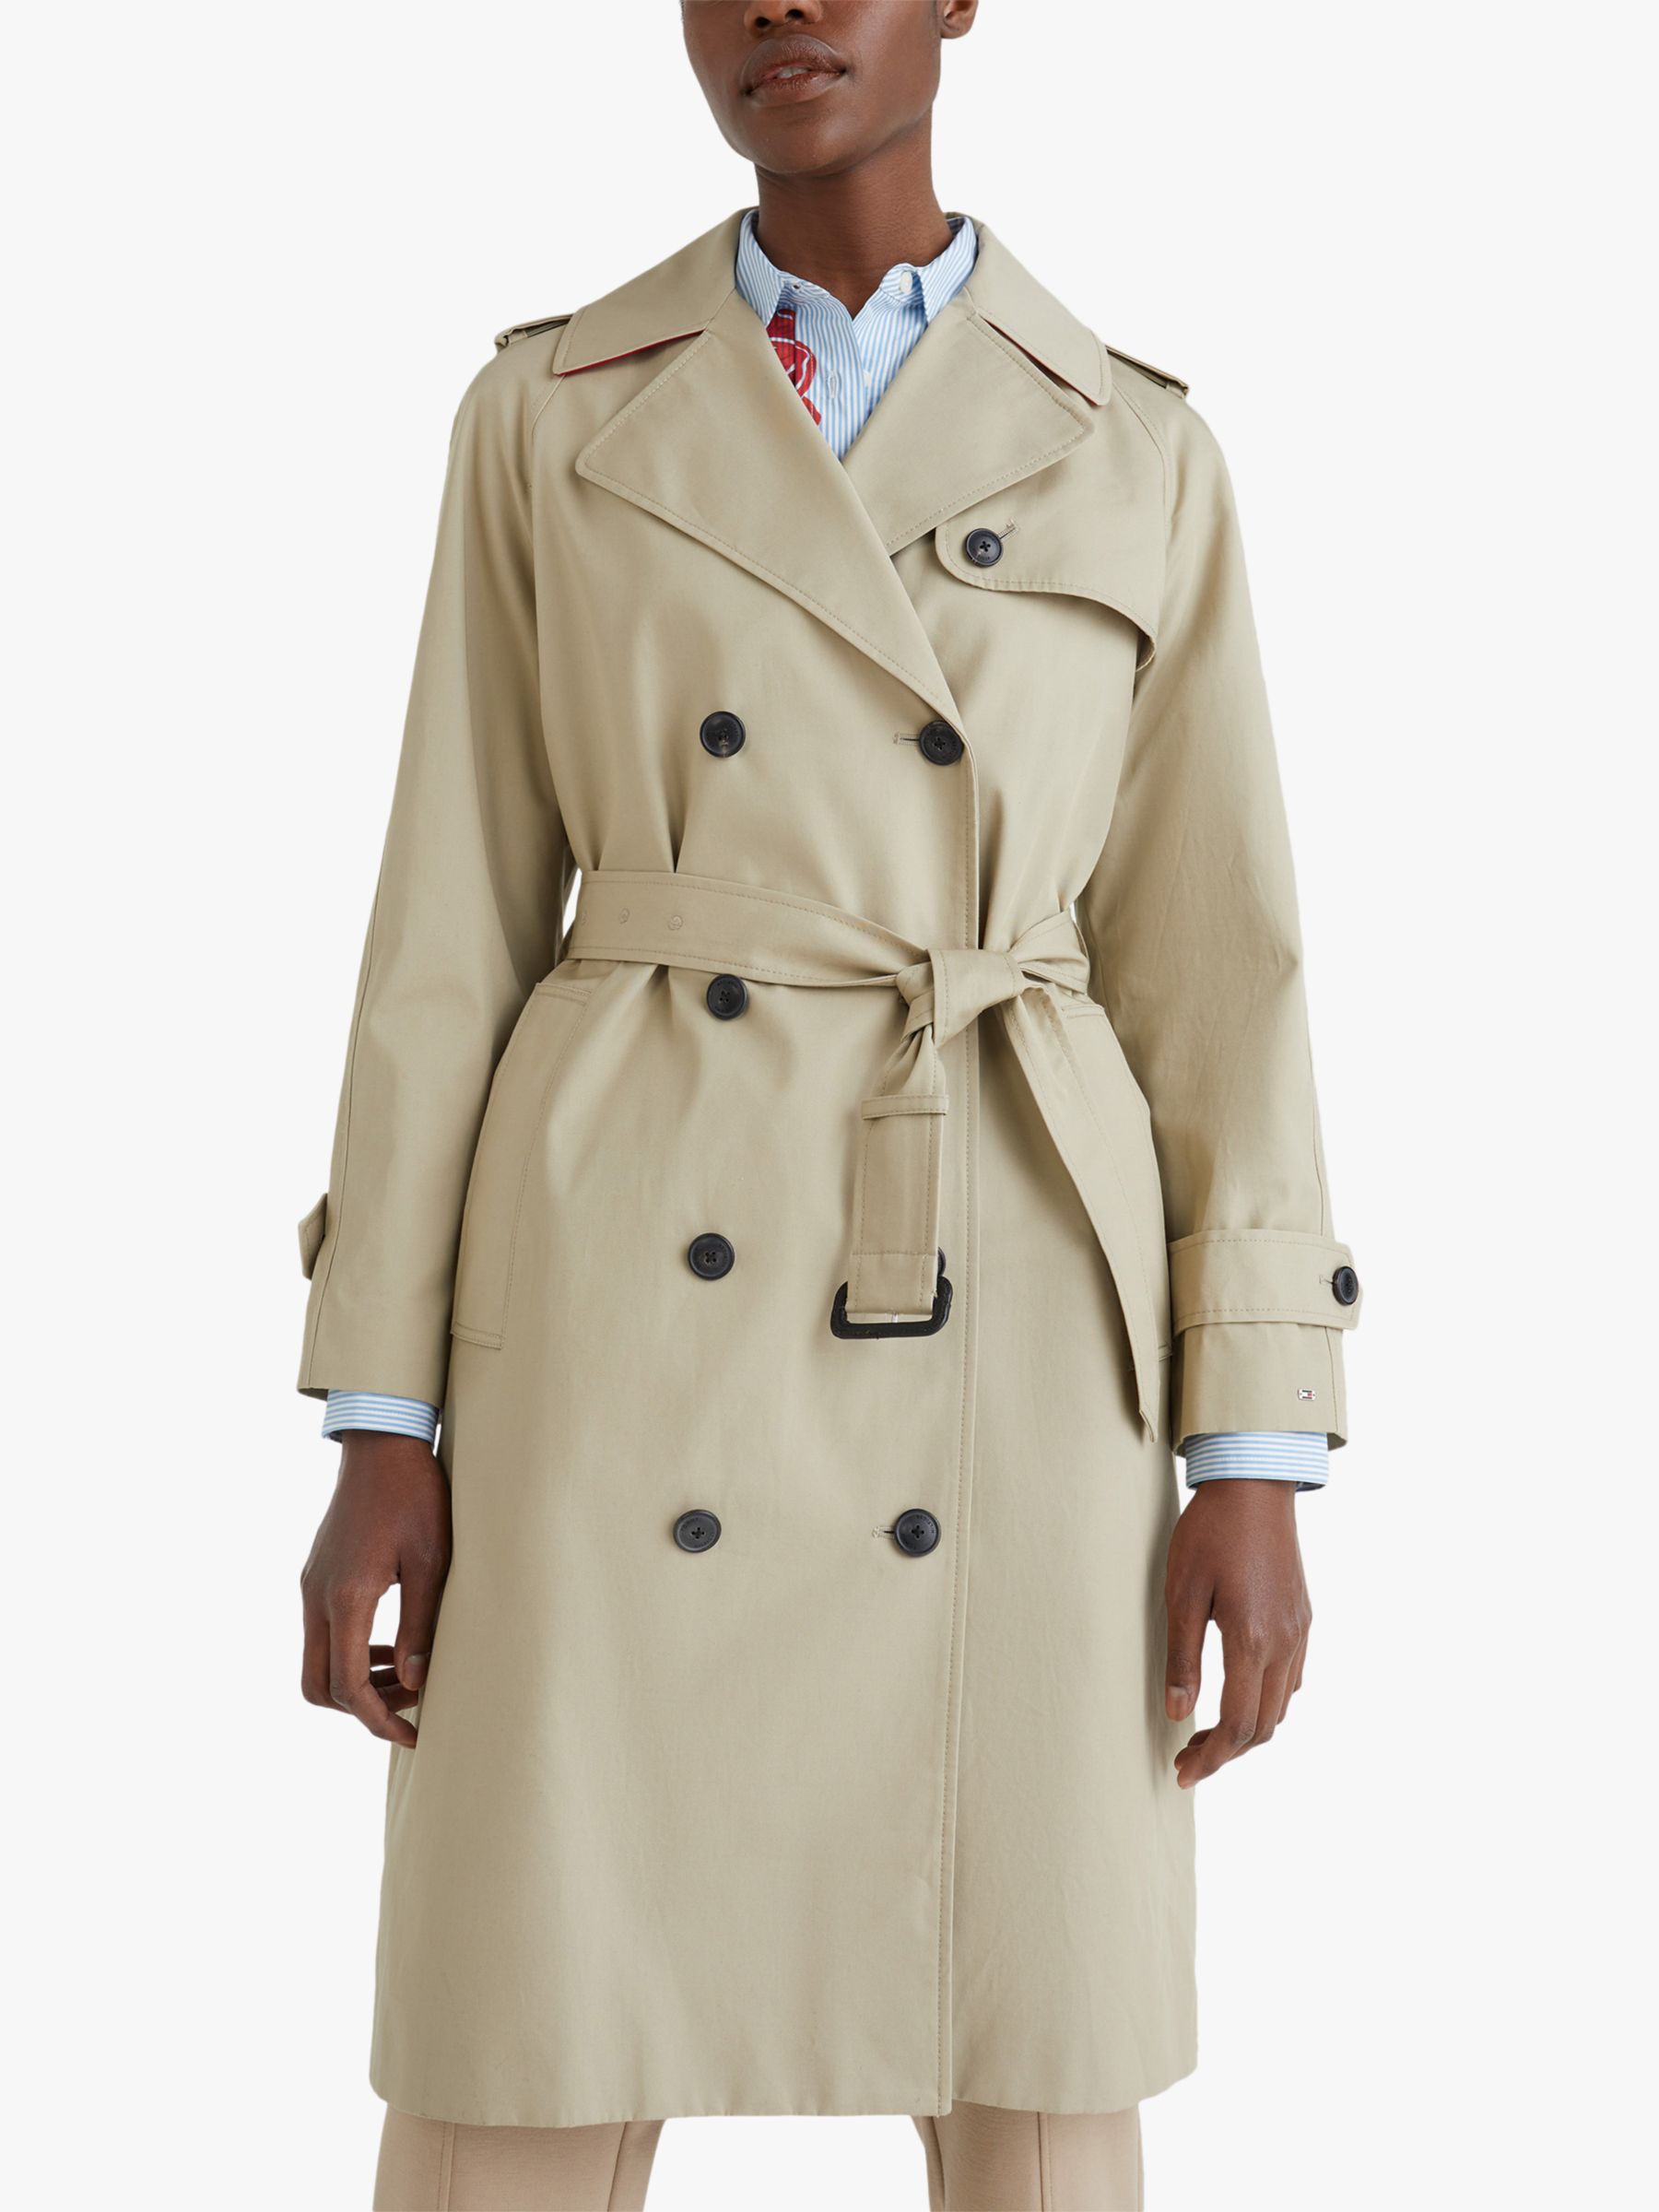 Hilse dechifrere mave Tommy Hilfiger Organic Cotton Double Breasted Trench Coat, Beige, 6